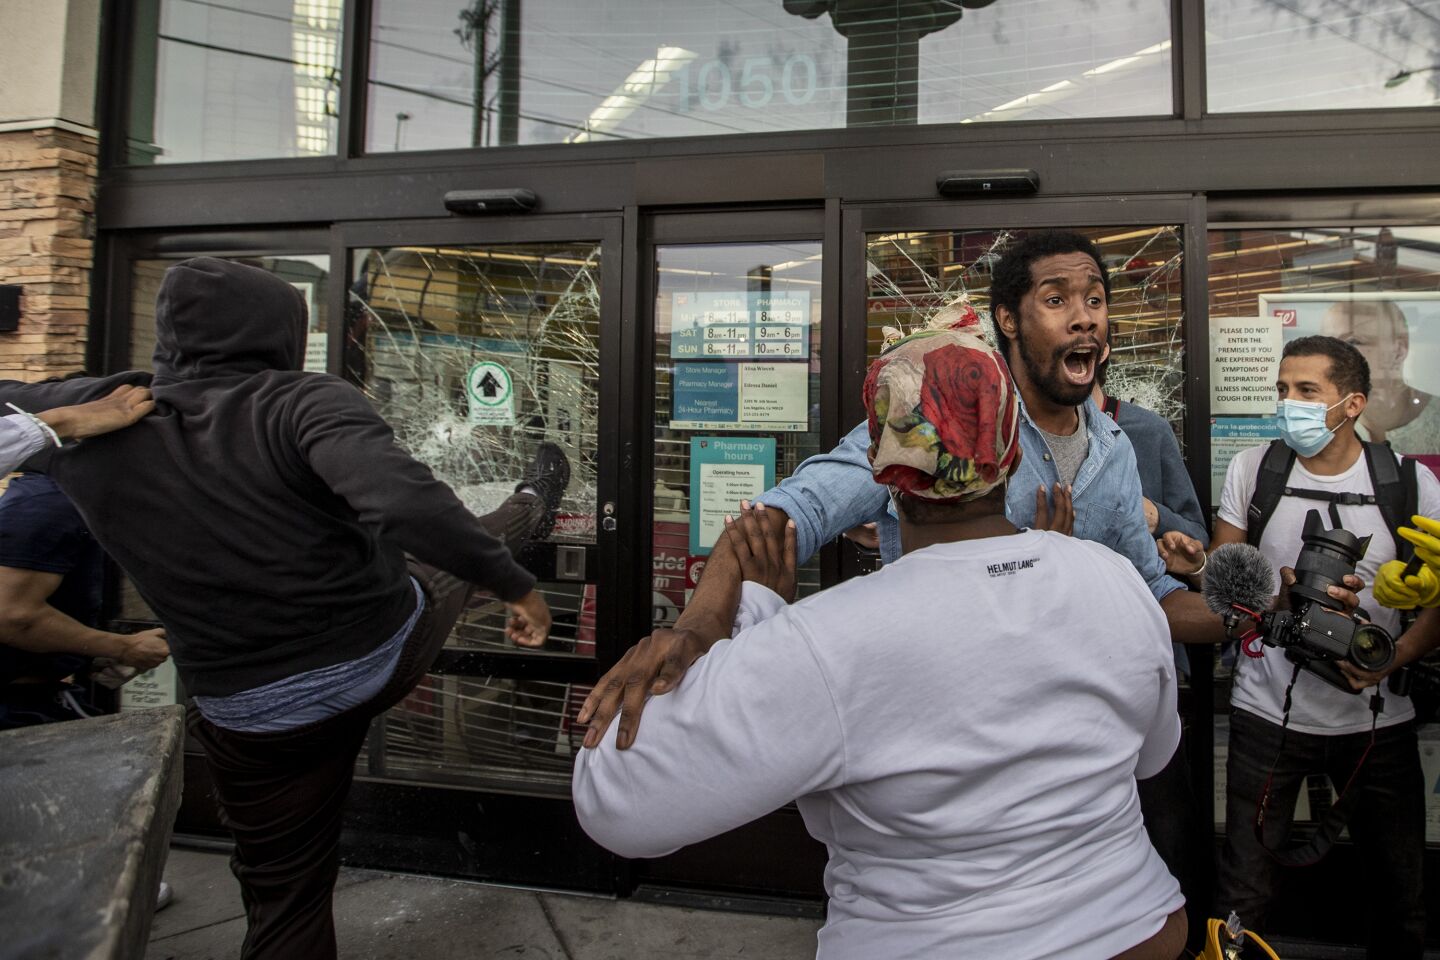 AJ Lovelace tries to stop people from breaking into a Walgreens store at Santa Monica Boulevard and Highland Avenue.